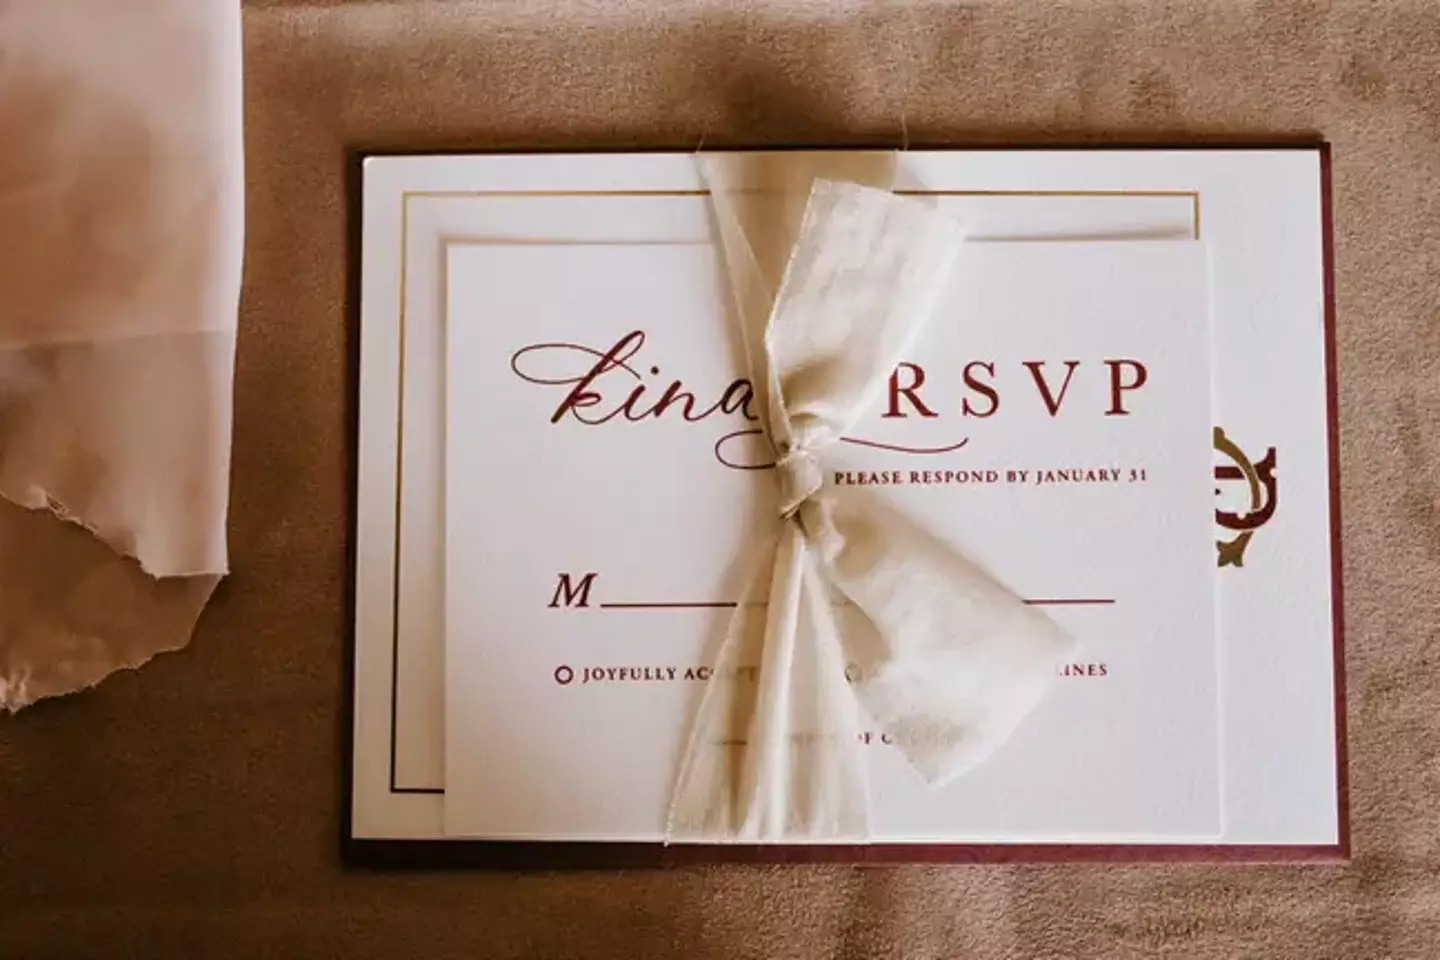 "Please RSVP to my wedding, but only you and not your partner who we've also known for years."